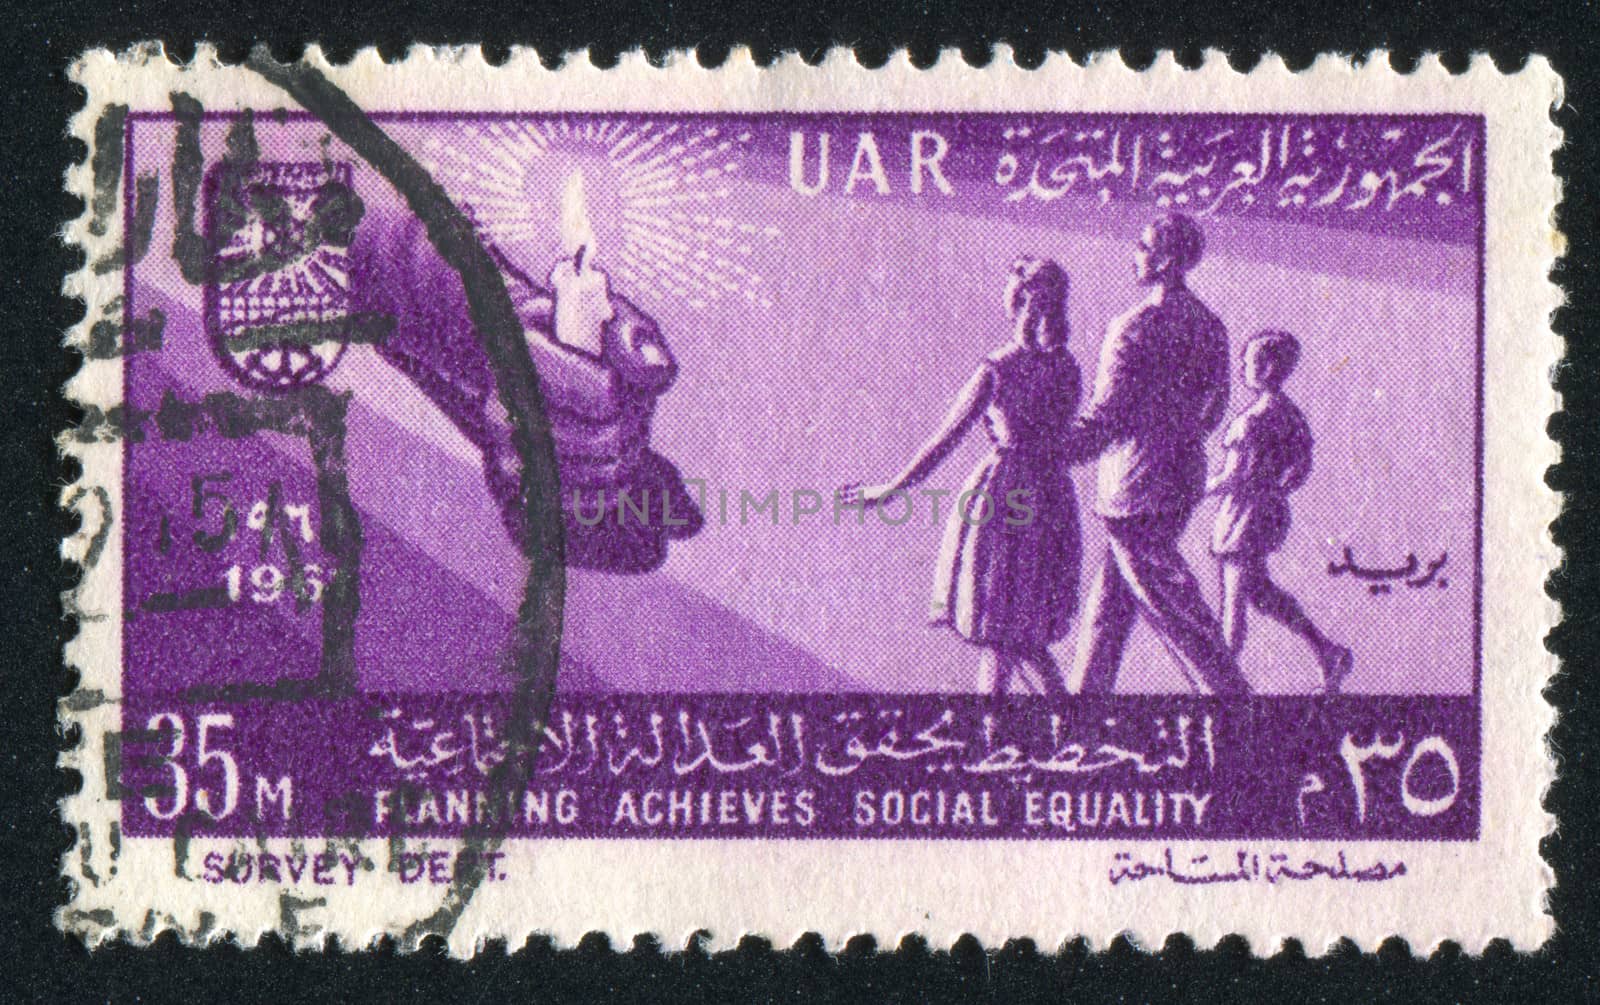 EGYPT - CIRCA 1961: stamp printed by Egypt, shows Hand with candle, family, circa 1961